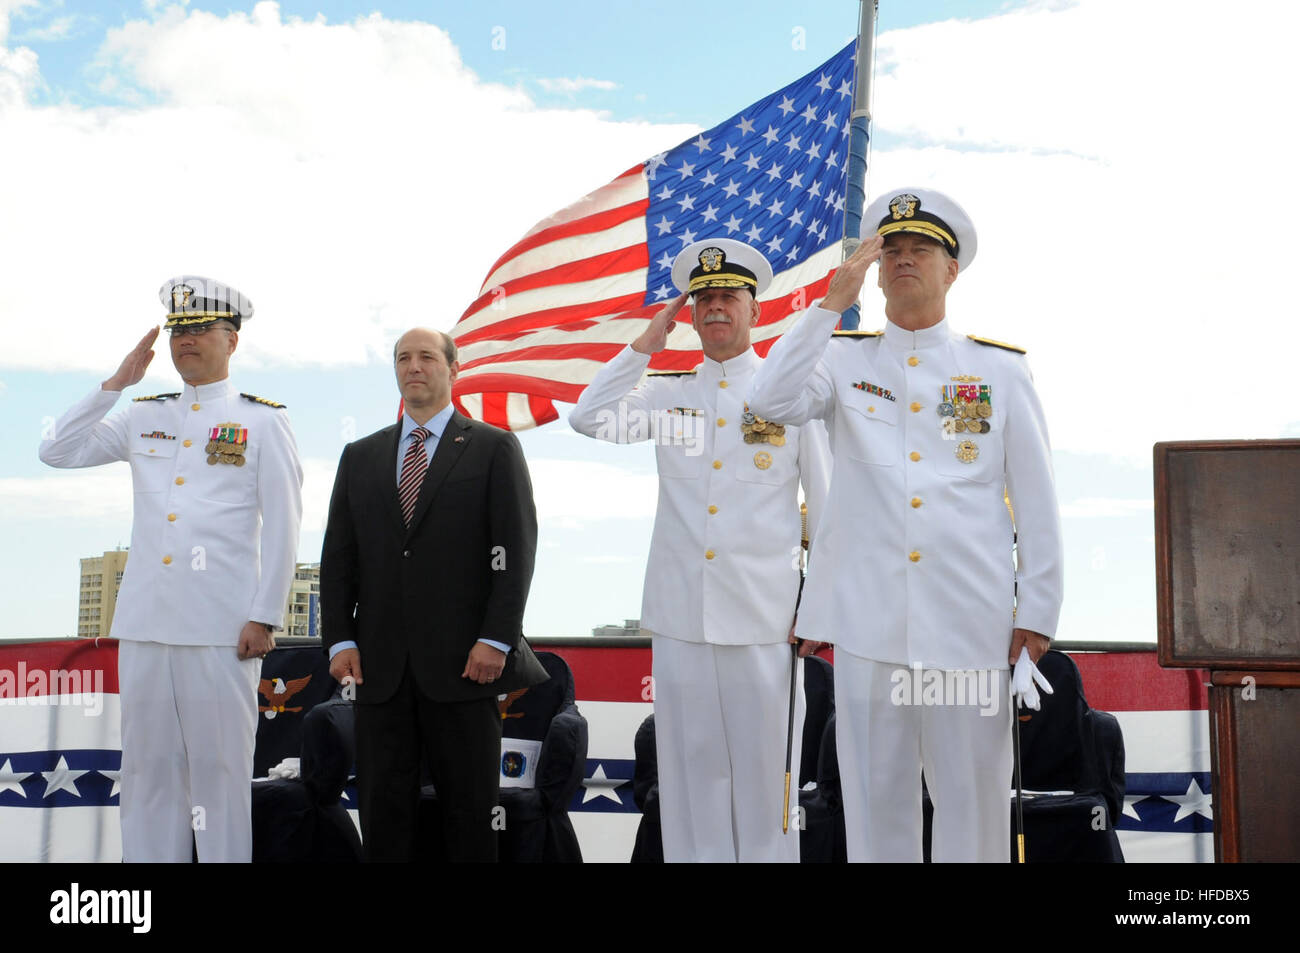 CAIRNS, Australia (July 31, 2013) Vice Adm. Robert L. Thomas Jr., right, salutes after taking command of the U.S. 7th Fleet alongside departing U.S. 7th Fleet commander Vice Adm. Scott H. Swift during a change of command ceremony aboard the U.S. 7th Fleet flagship USS Blue Ridge (LCC 19) in Cairns, Australia. With Thomas and Swift are U.S. Ambassador to Australia Jeffrey Bleich and Capt. John Shimotsu, U.S. 7th Fleet Chaplain. Blue Ridge and embarked U.S. 7th Fleet staff are on patrol operating forward, building maritime partnerships and conducting security and stability operations. (U.S. Navy Stock Photo